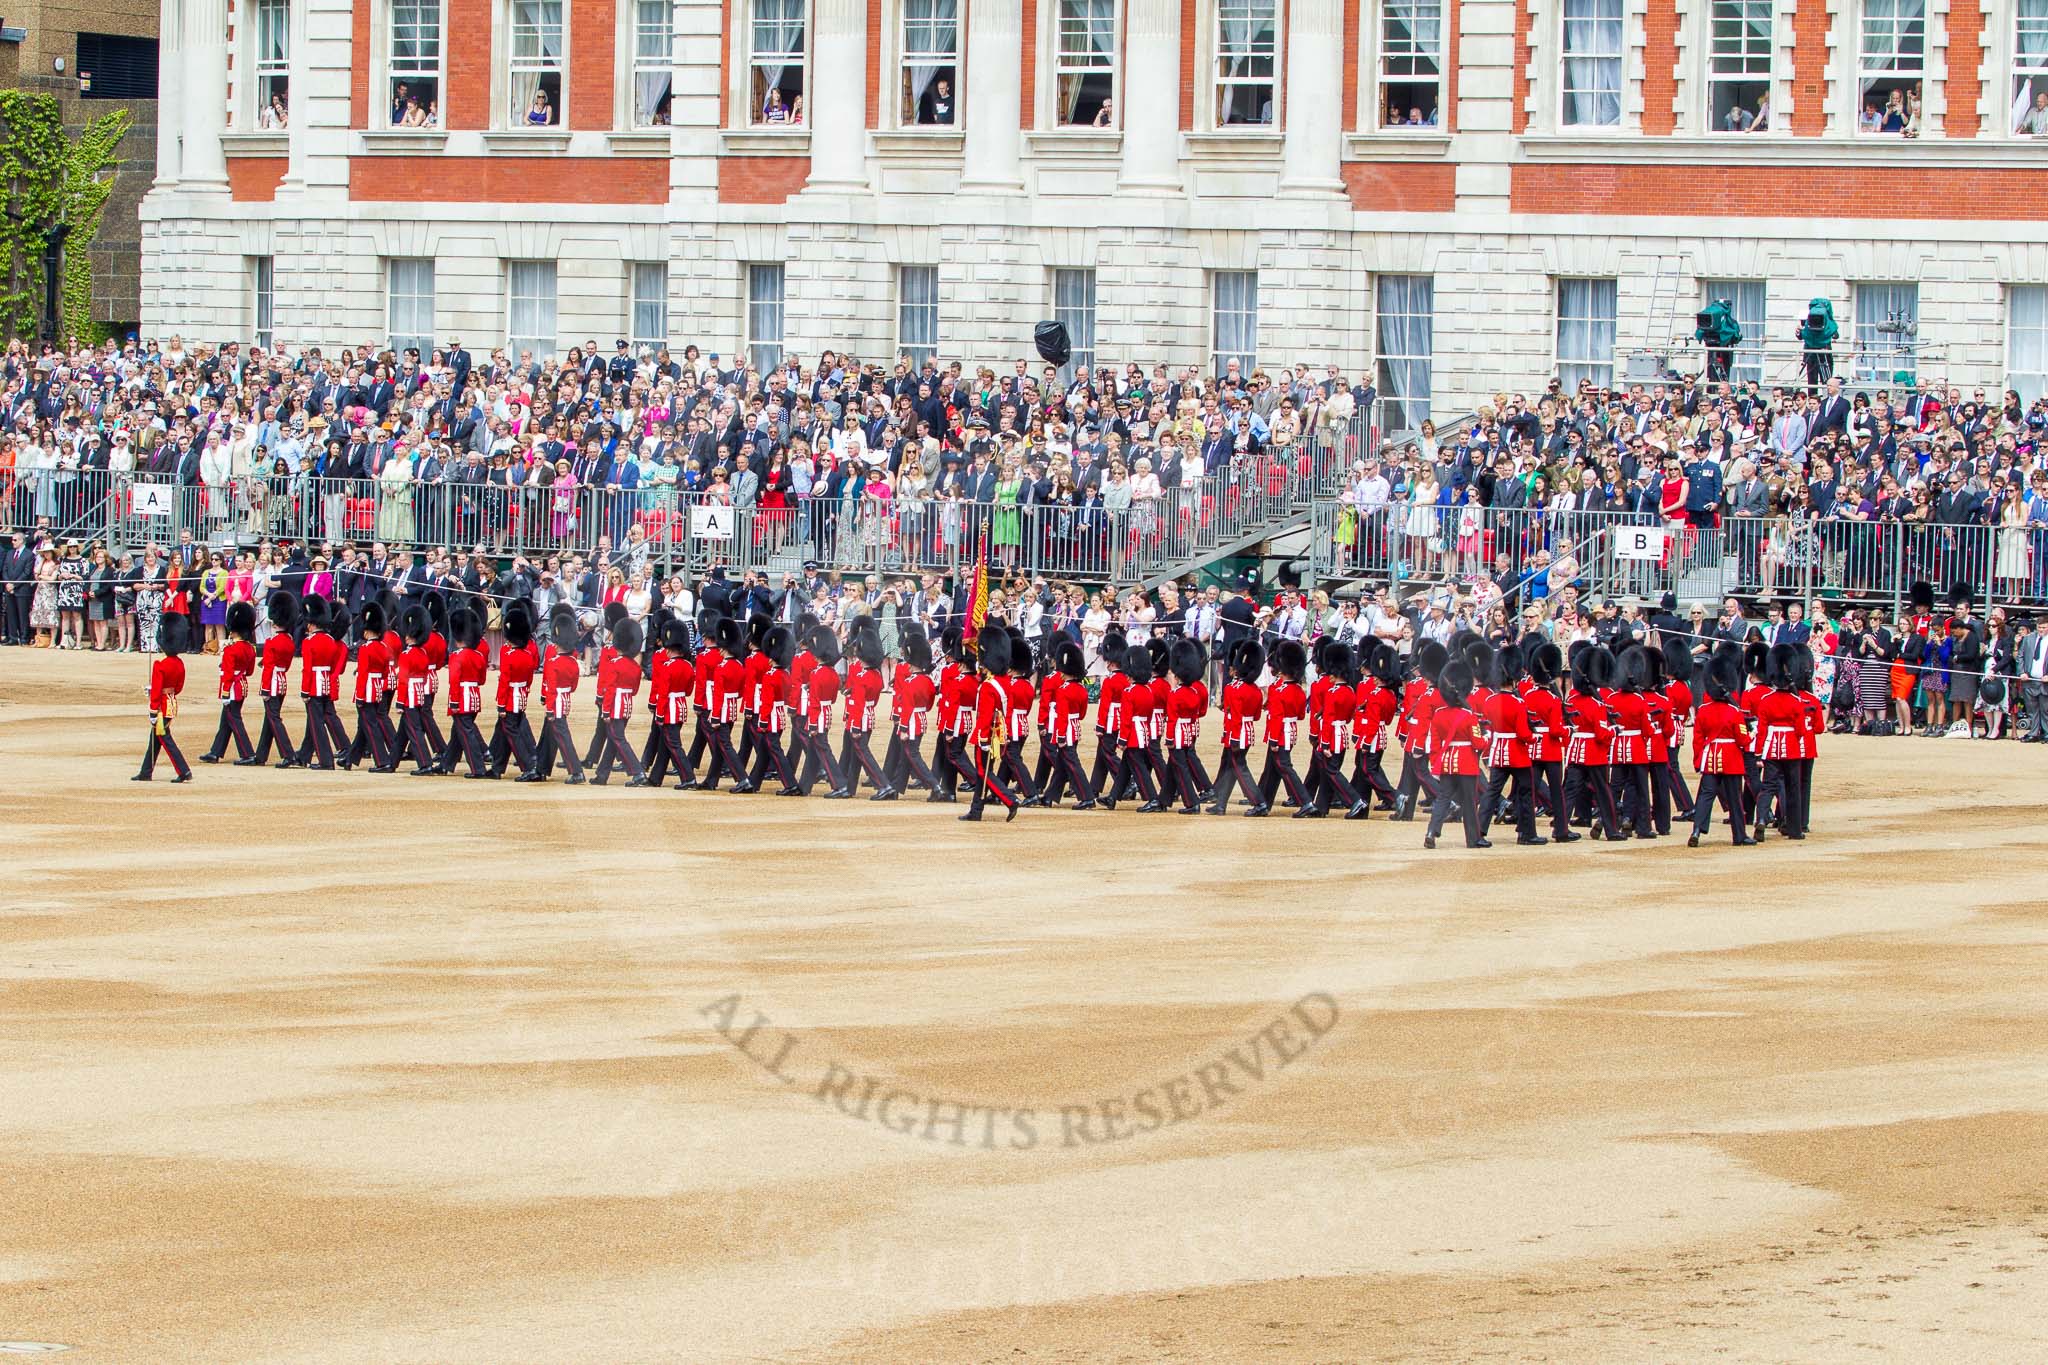 Trooping the Colour 2014.
Horse Guards Parade, Westminster,
London SW1A,

United Kingdom,
on 14 June 2014 at 11:25, image #551